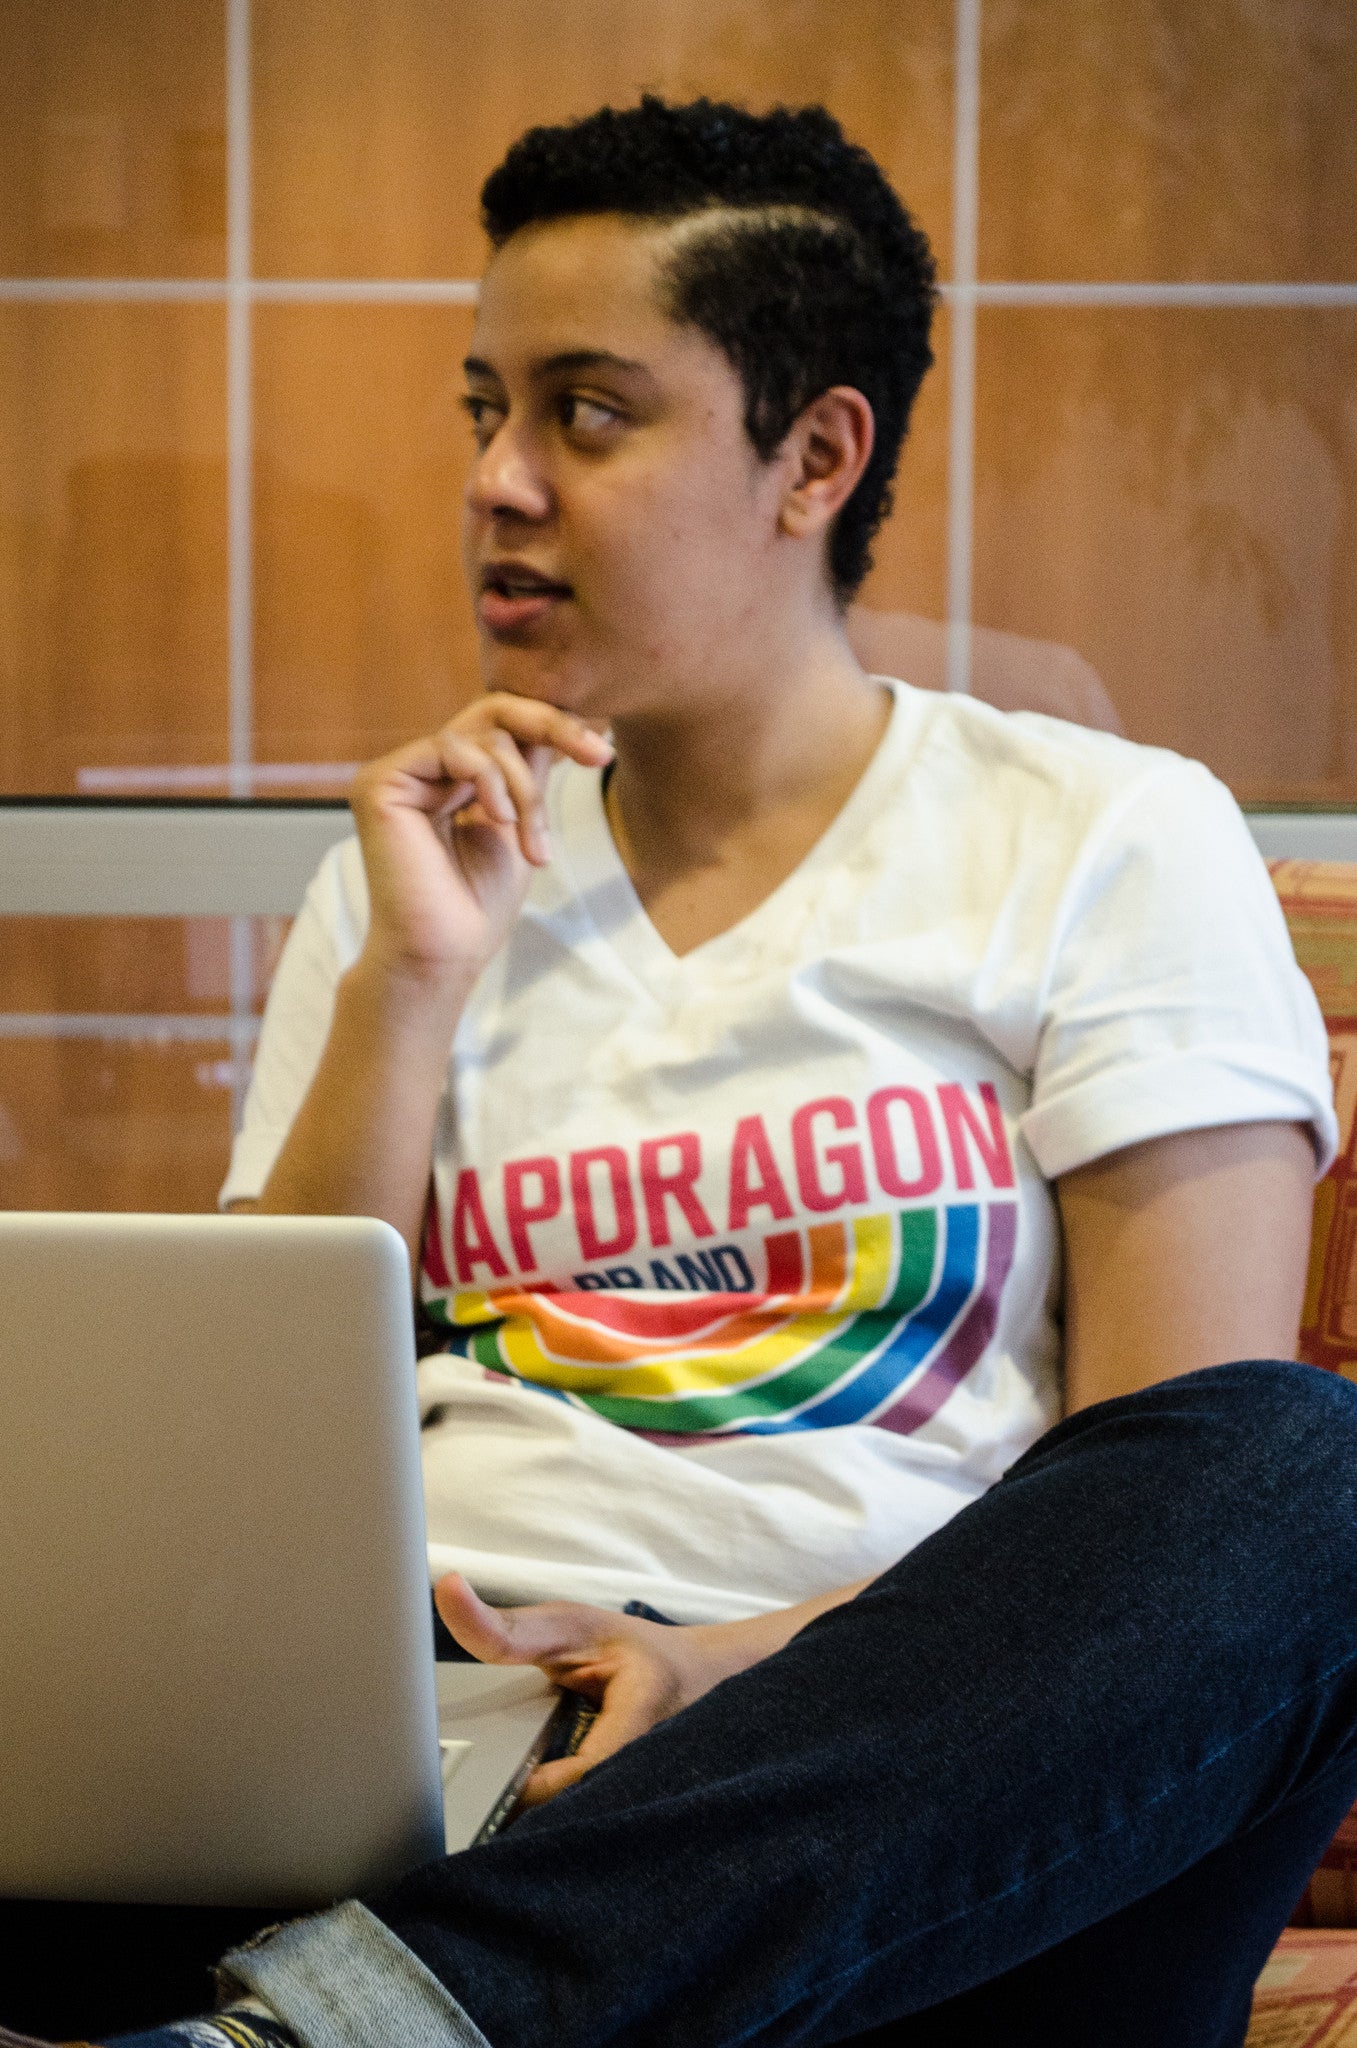 Snapdragon Brand Clothing Granny Square Crochet Print unisex rainbow v-neck tee t-shirt in style logo features a vintage psychedelic boho feel and a rainbow of colors. Made of comfortable cotton. lgbt lgbtq lgbtqi